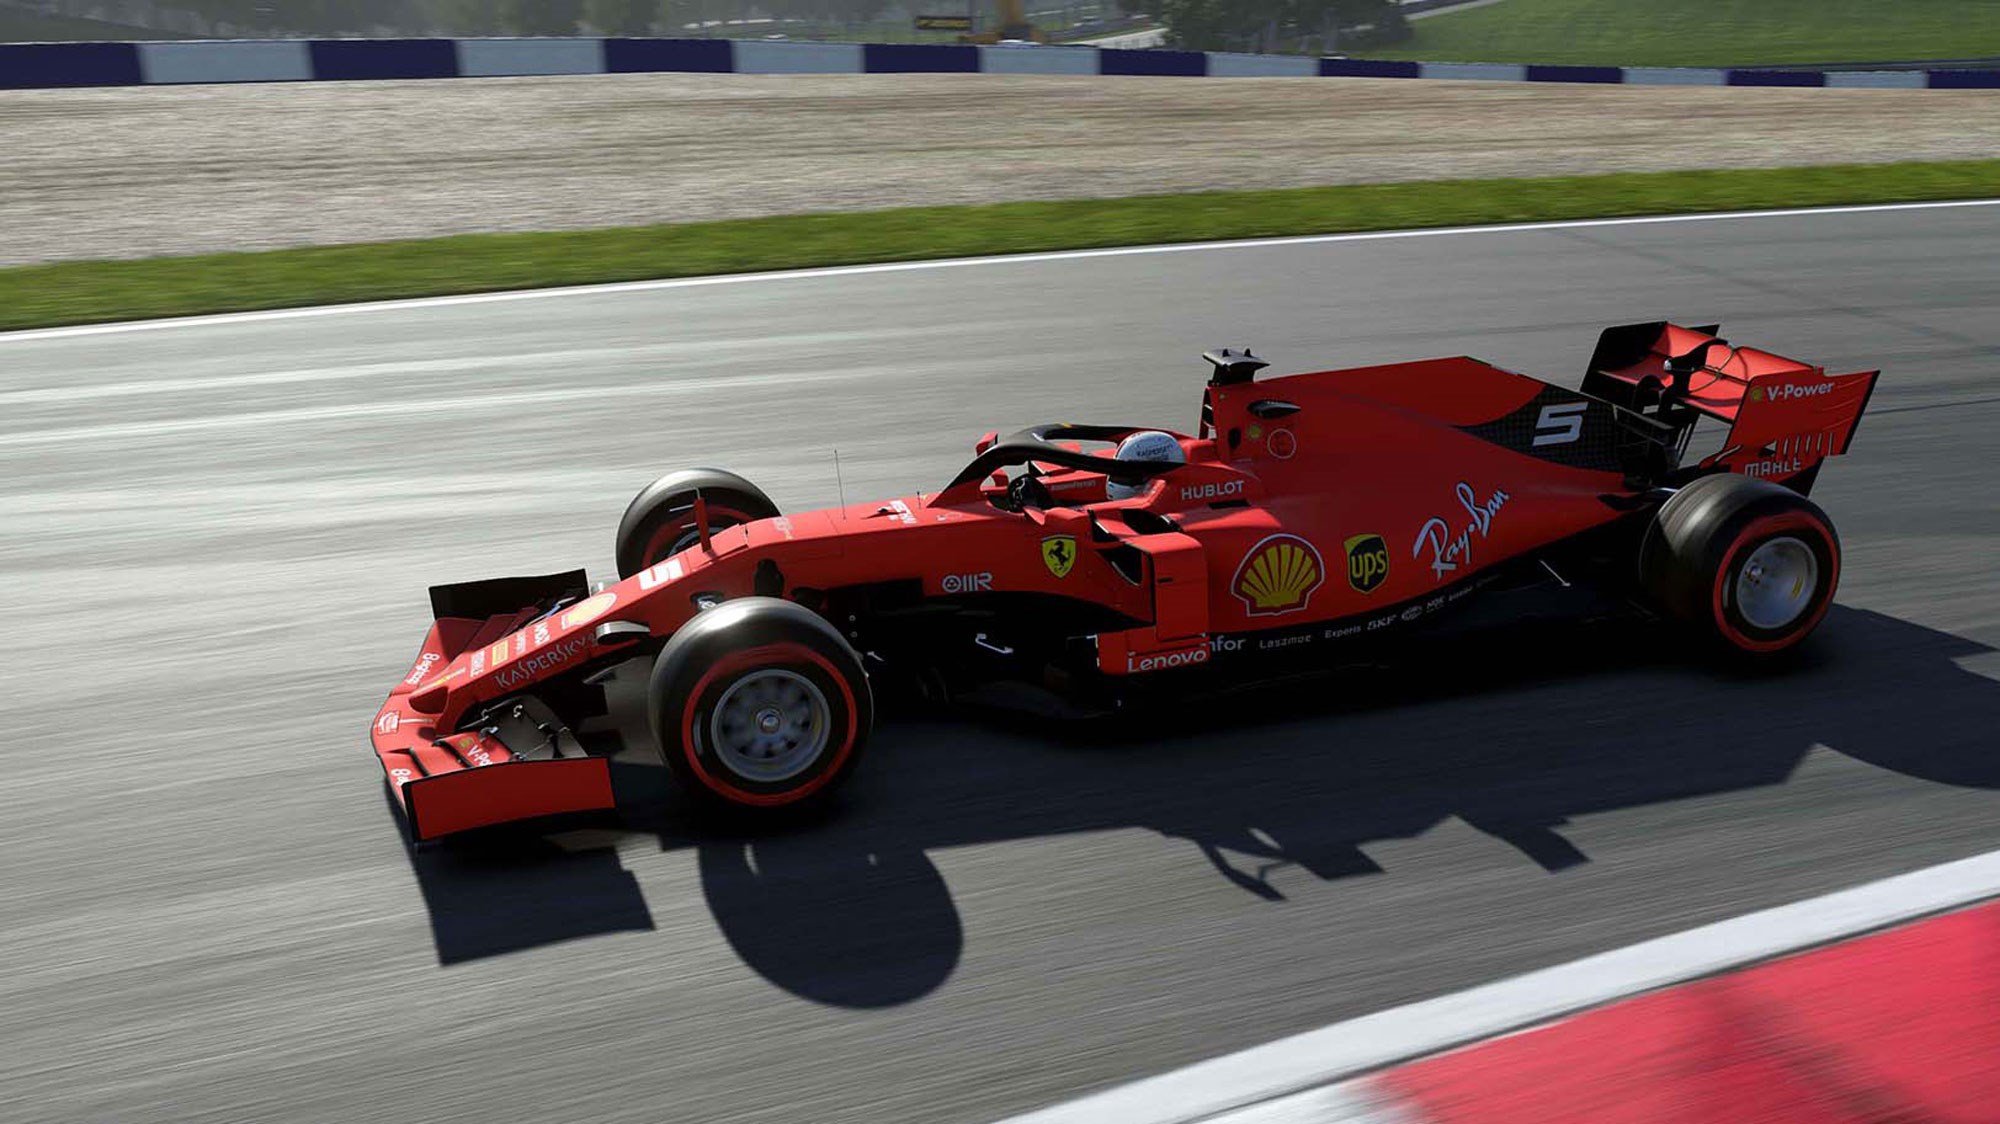 f1 2019 xbox one game